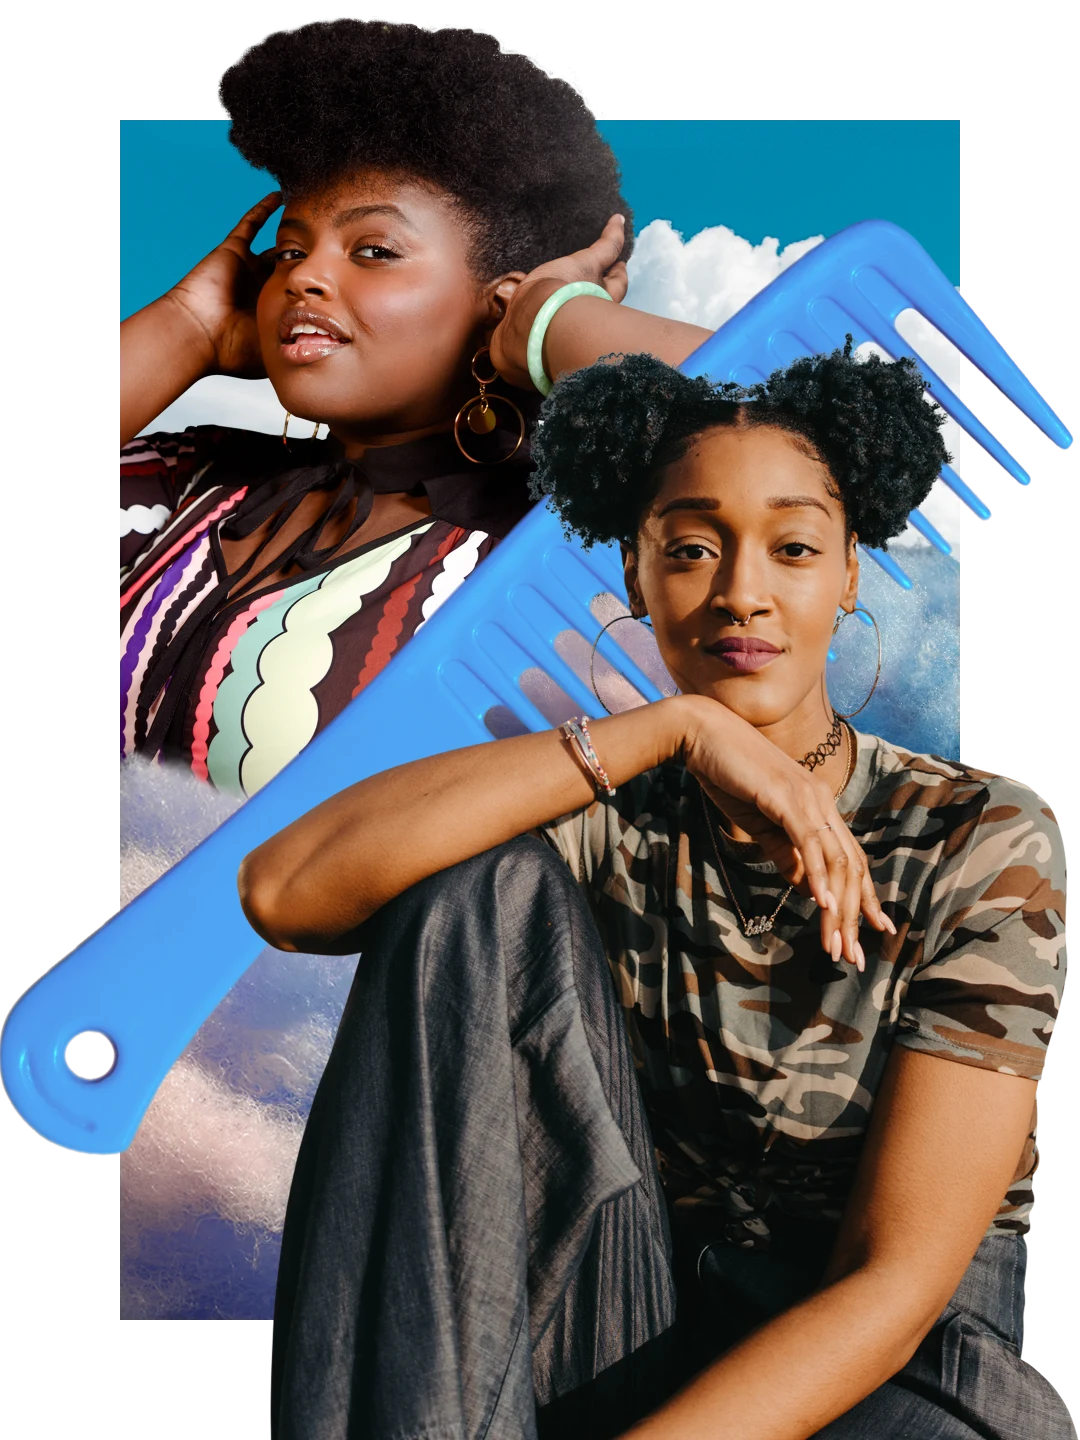 Black woman at right with two natural hair puffs looks at camera, arm propped on her leg. Black woman at left holds her hands to her natural hair. Large blue comb in the middle. Blue sky with white clouds in the background.
